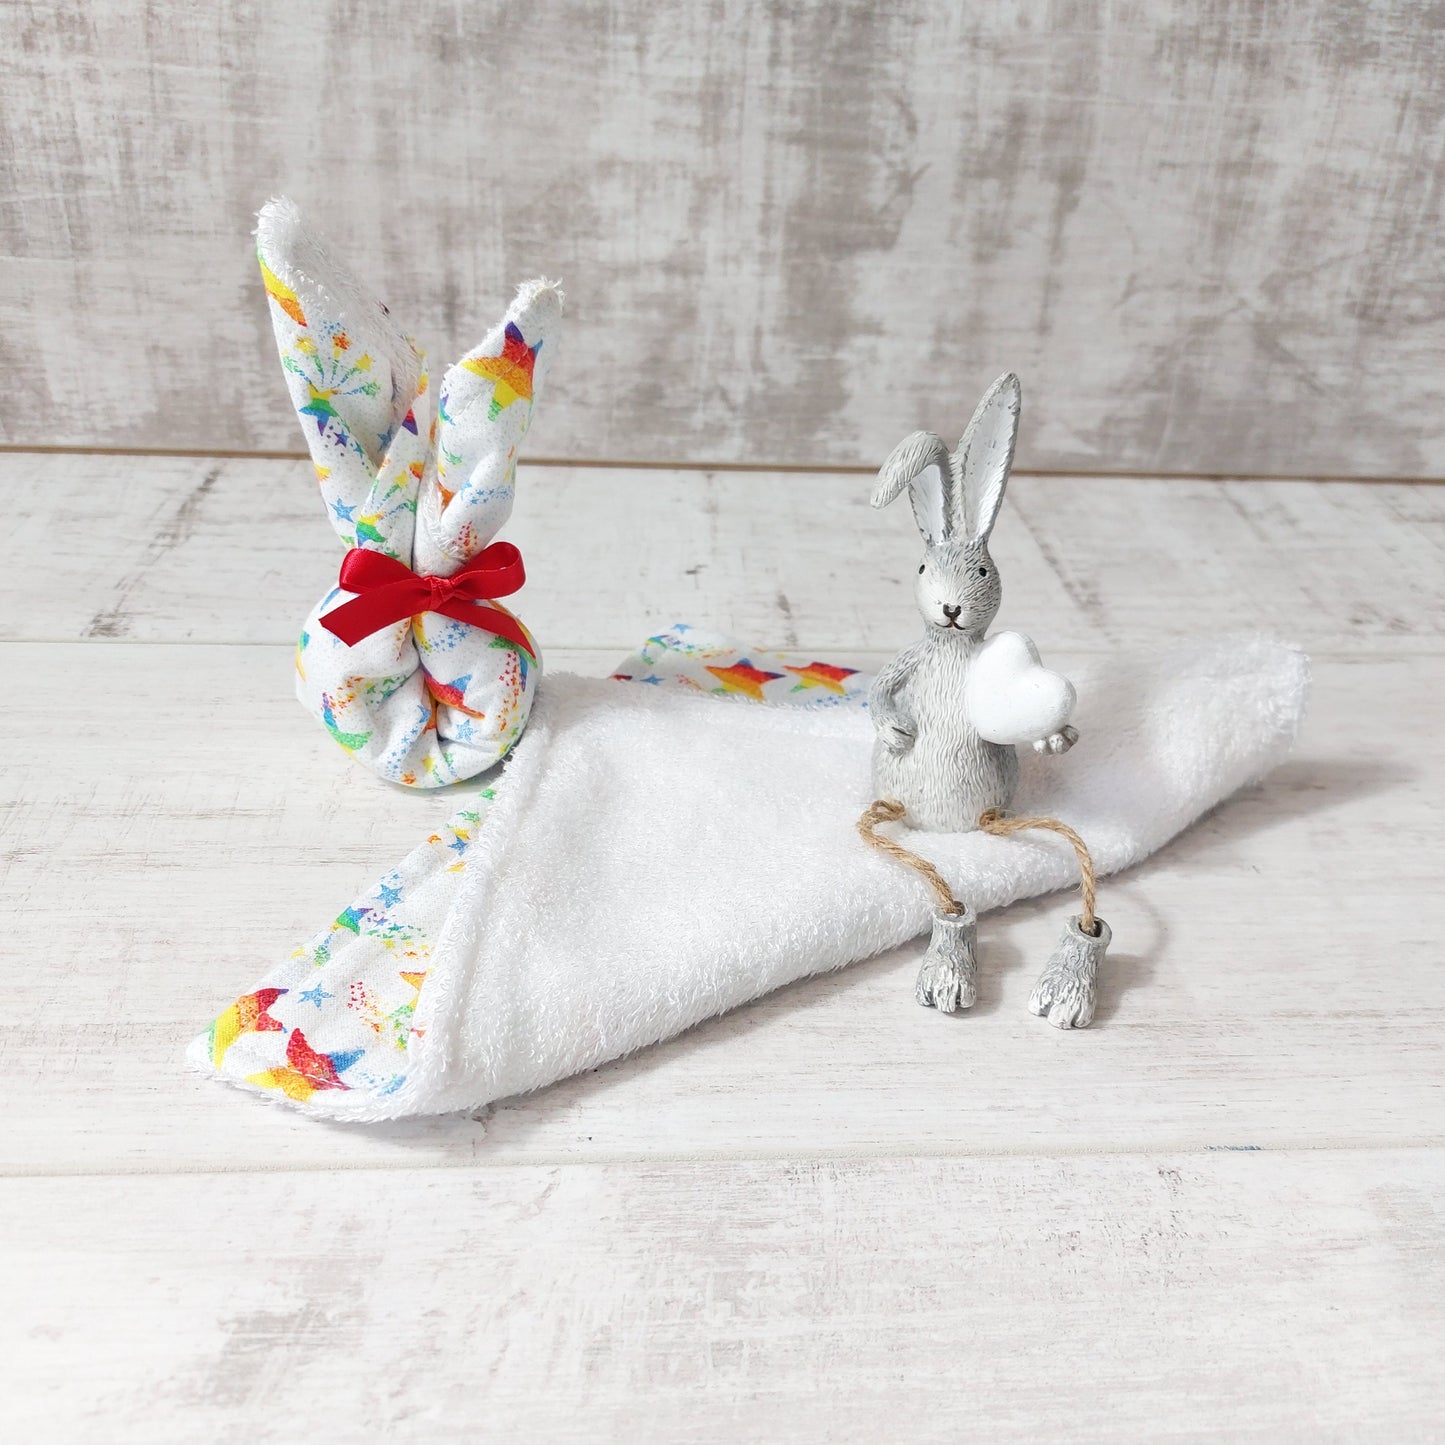 Cute Newborn Gift Set with Reusable Wipes and Bunny Figurine